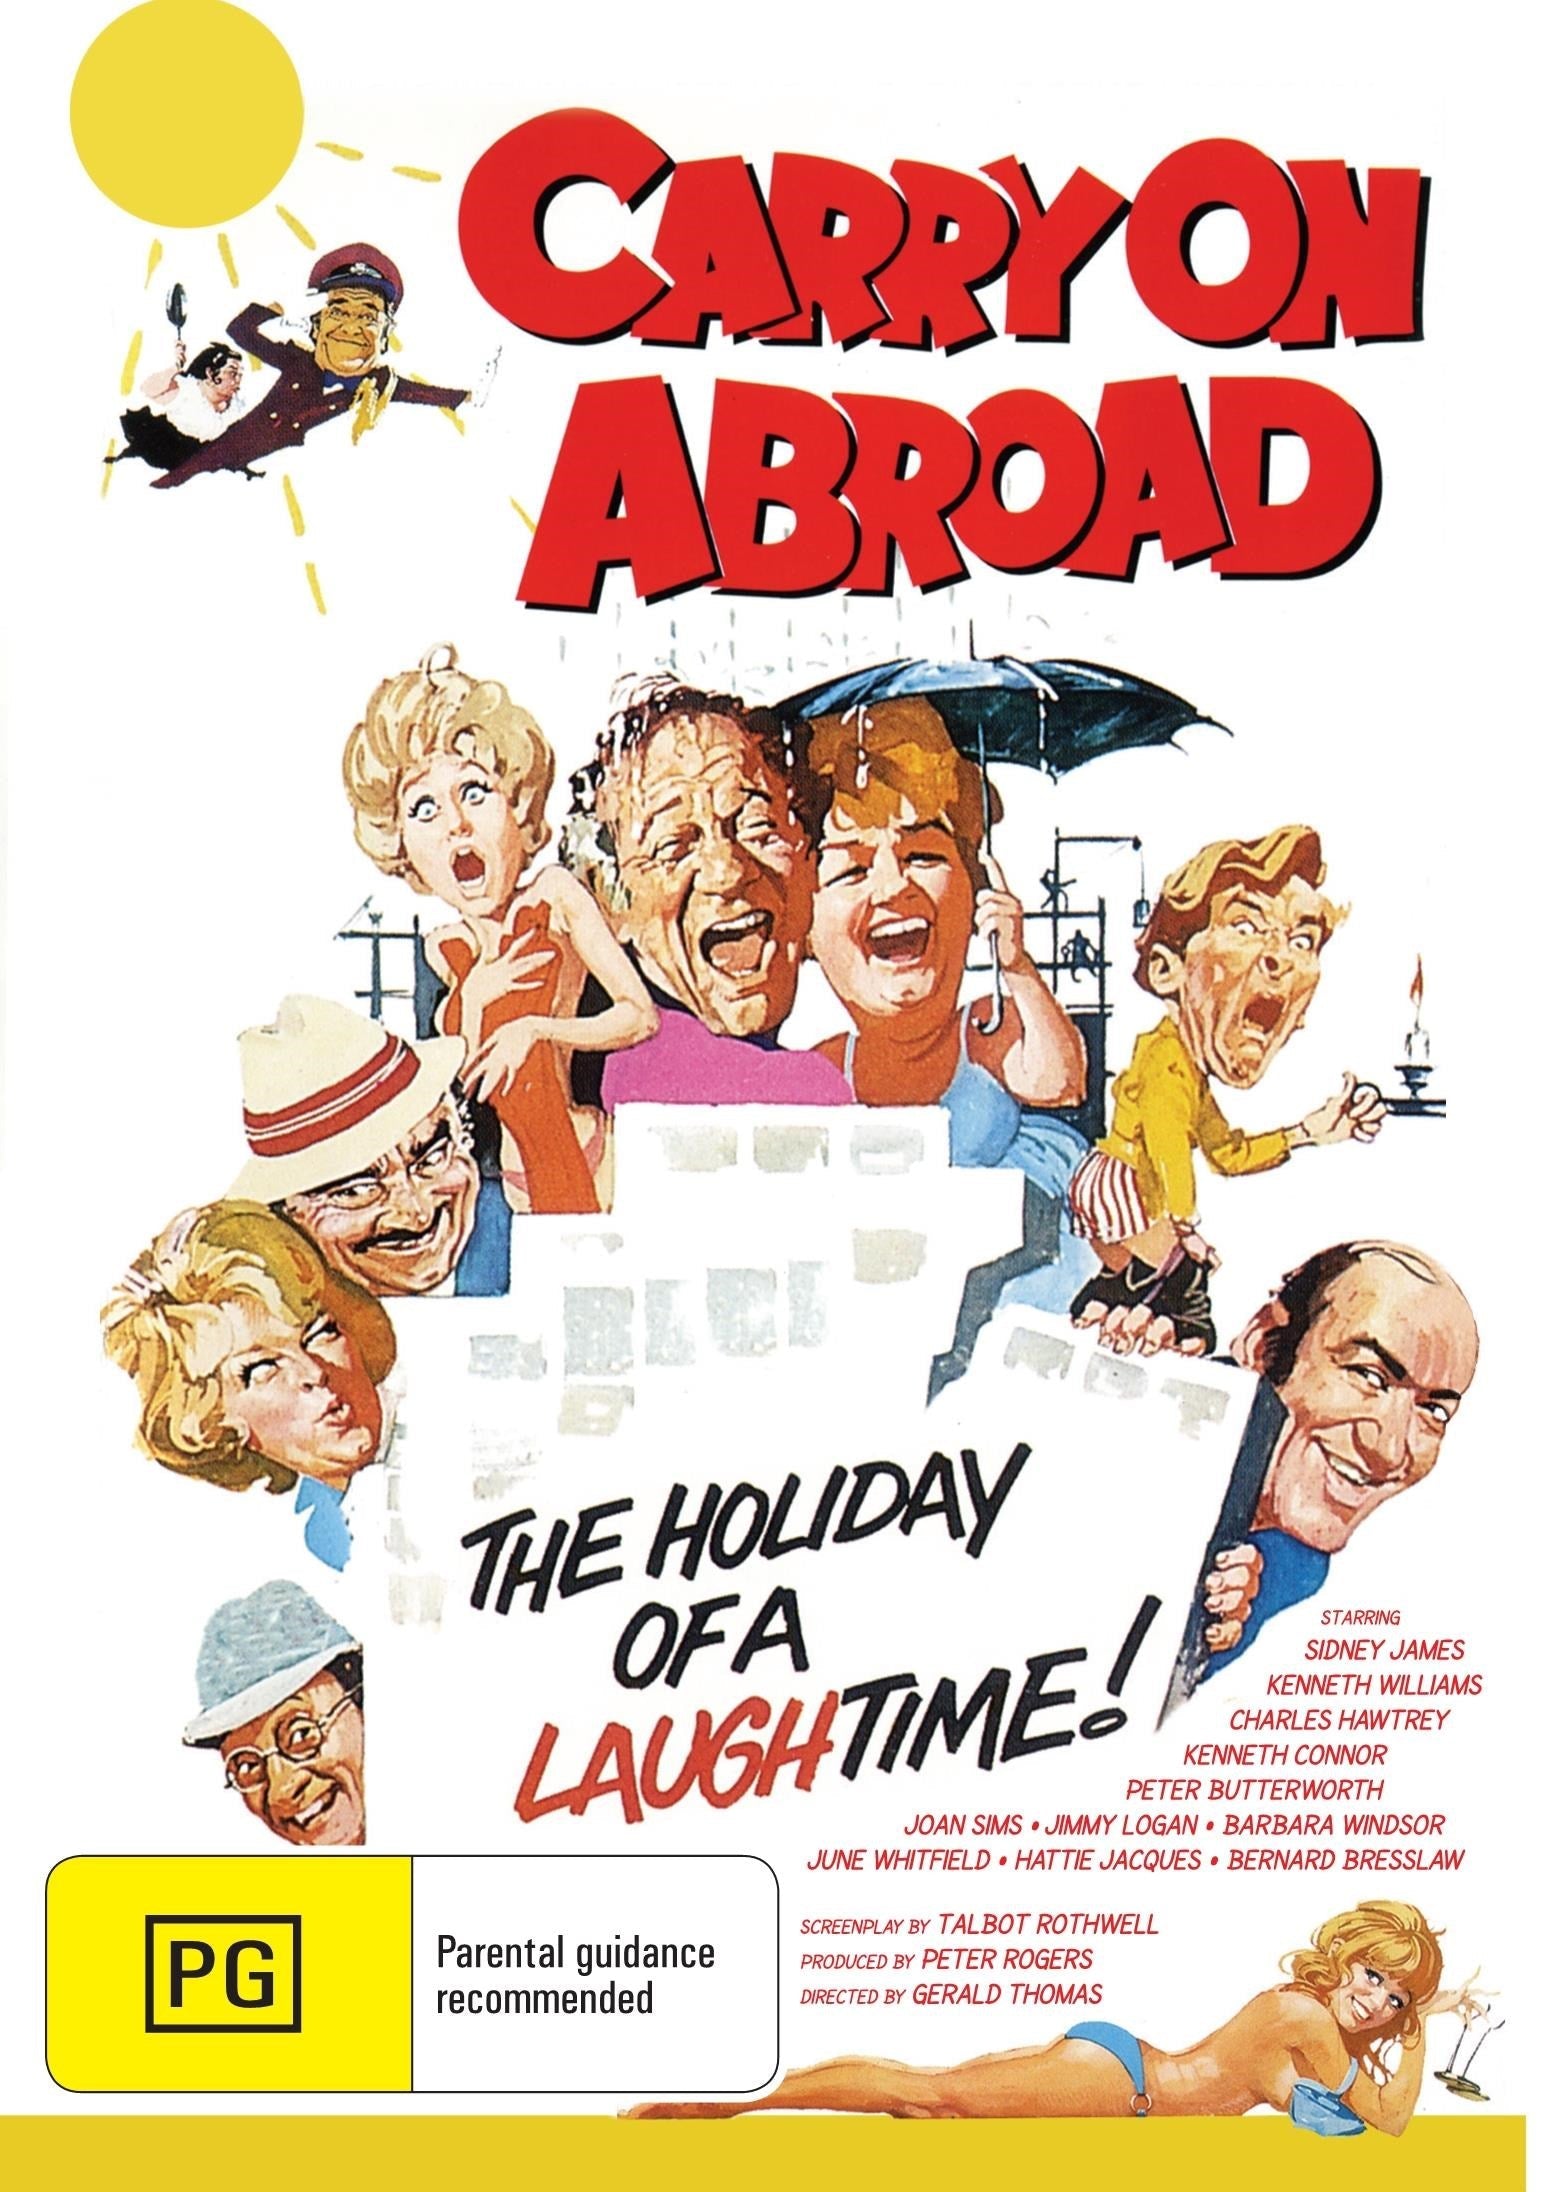 Carry On Abroad rareandcollectibledvds